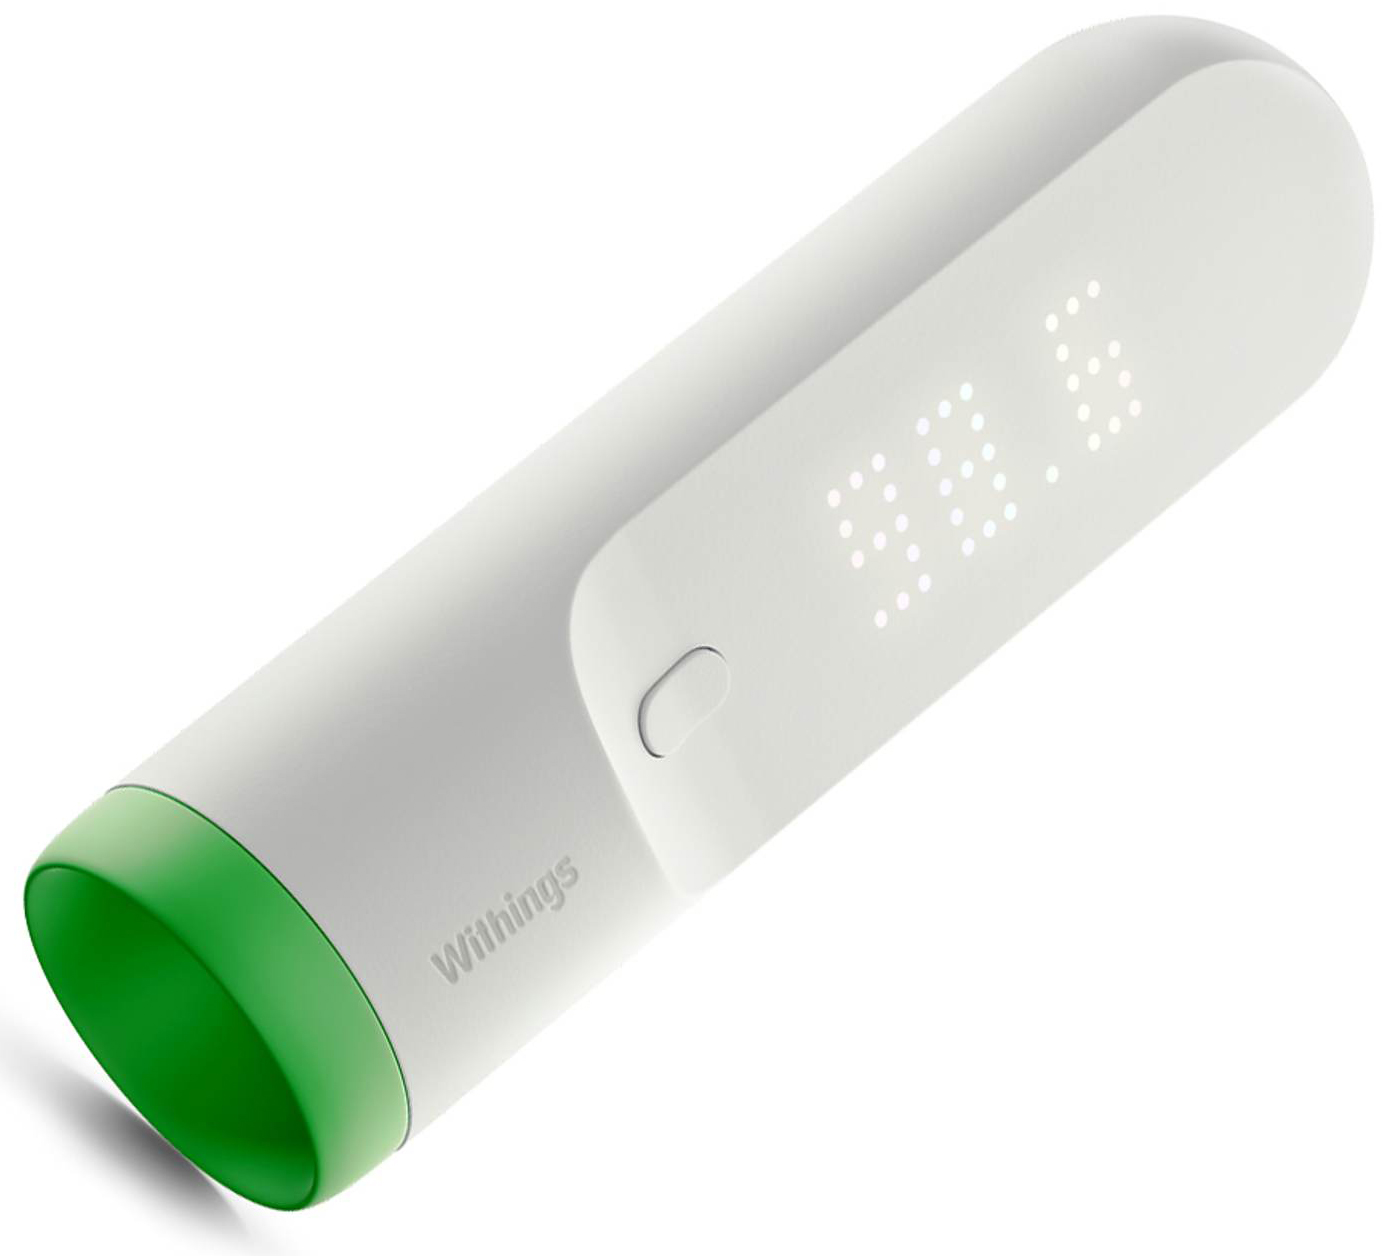 Withings-WLAN-Schlaefenthermometer-Weiss-01.jpg